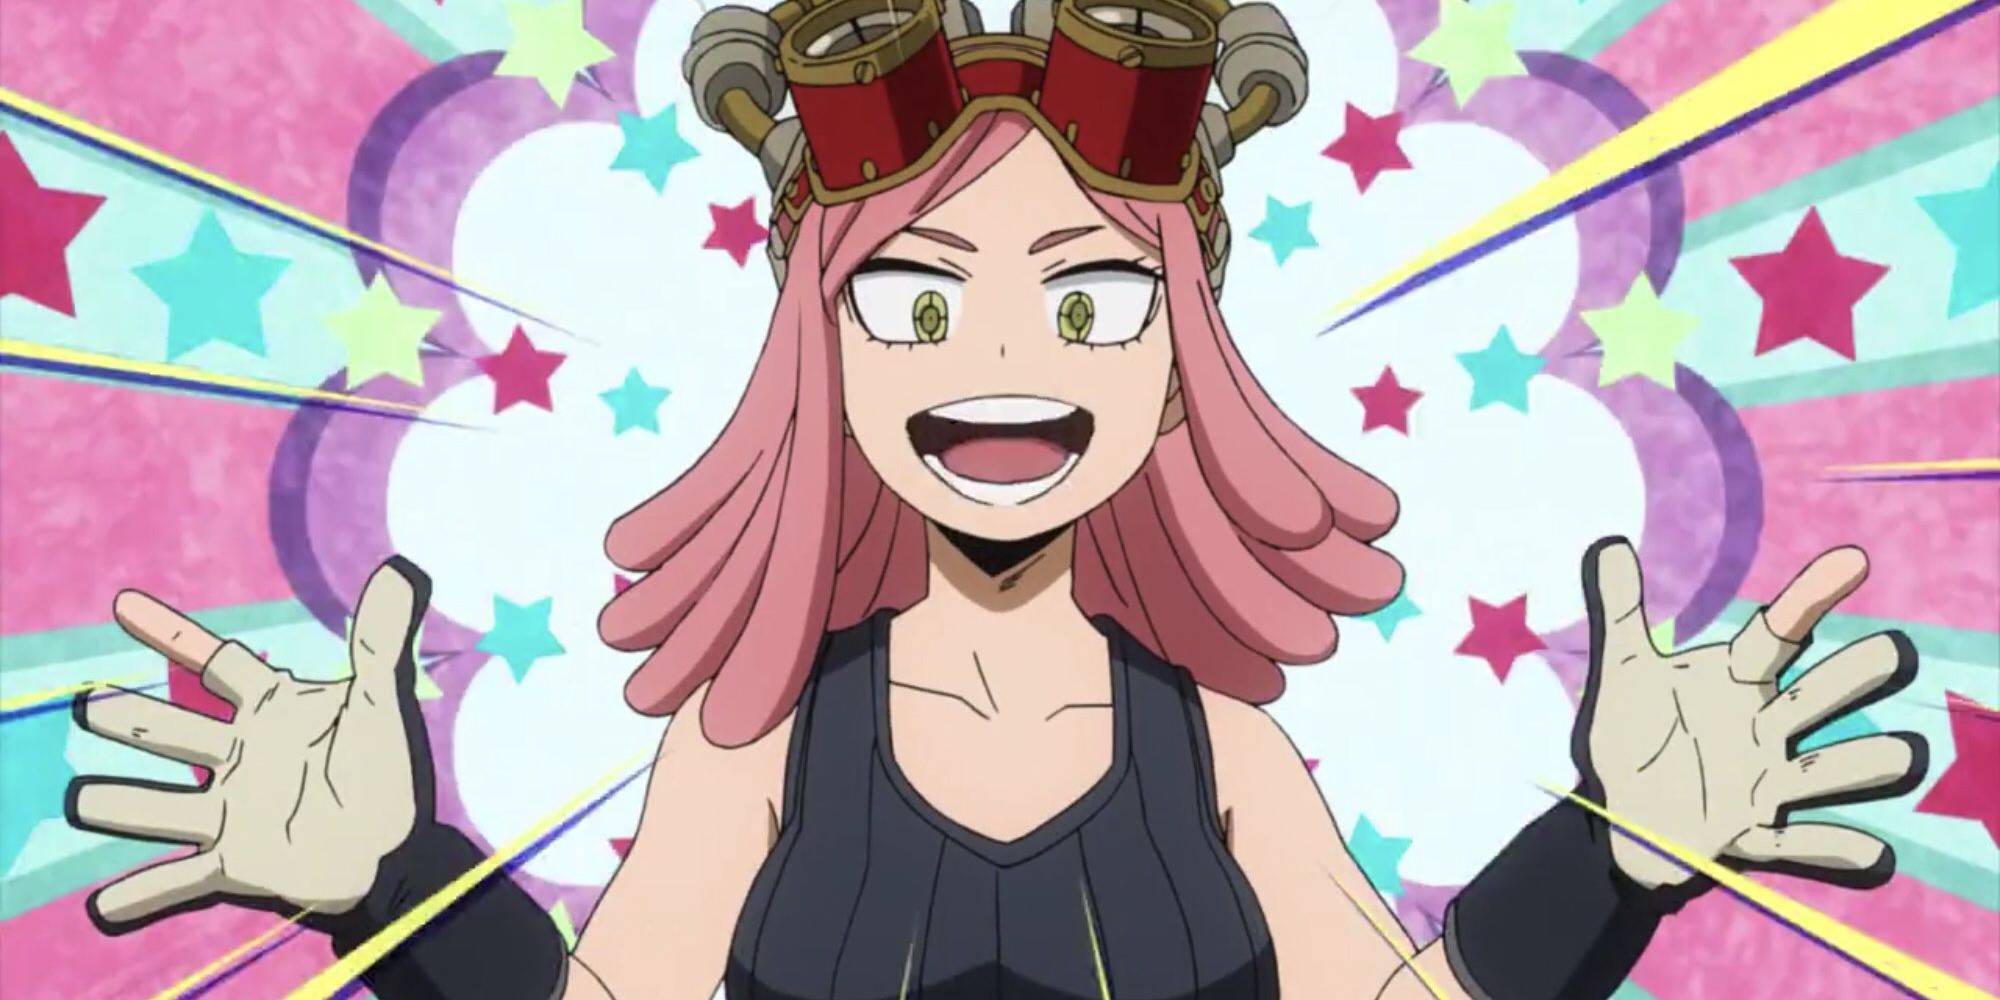 Mei hatsume quirk